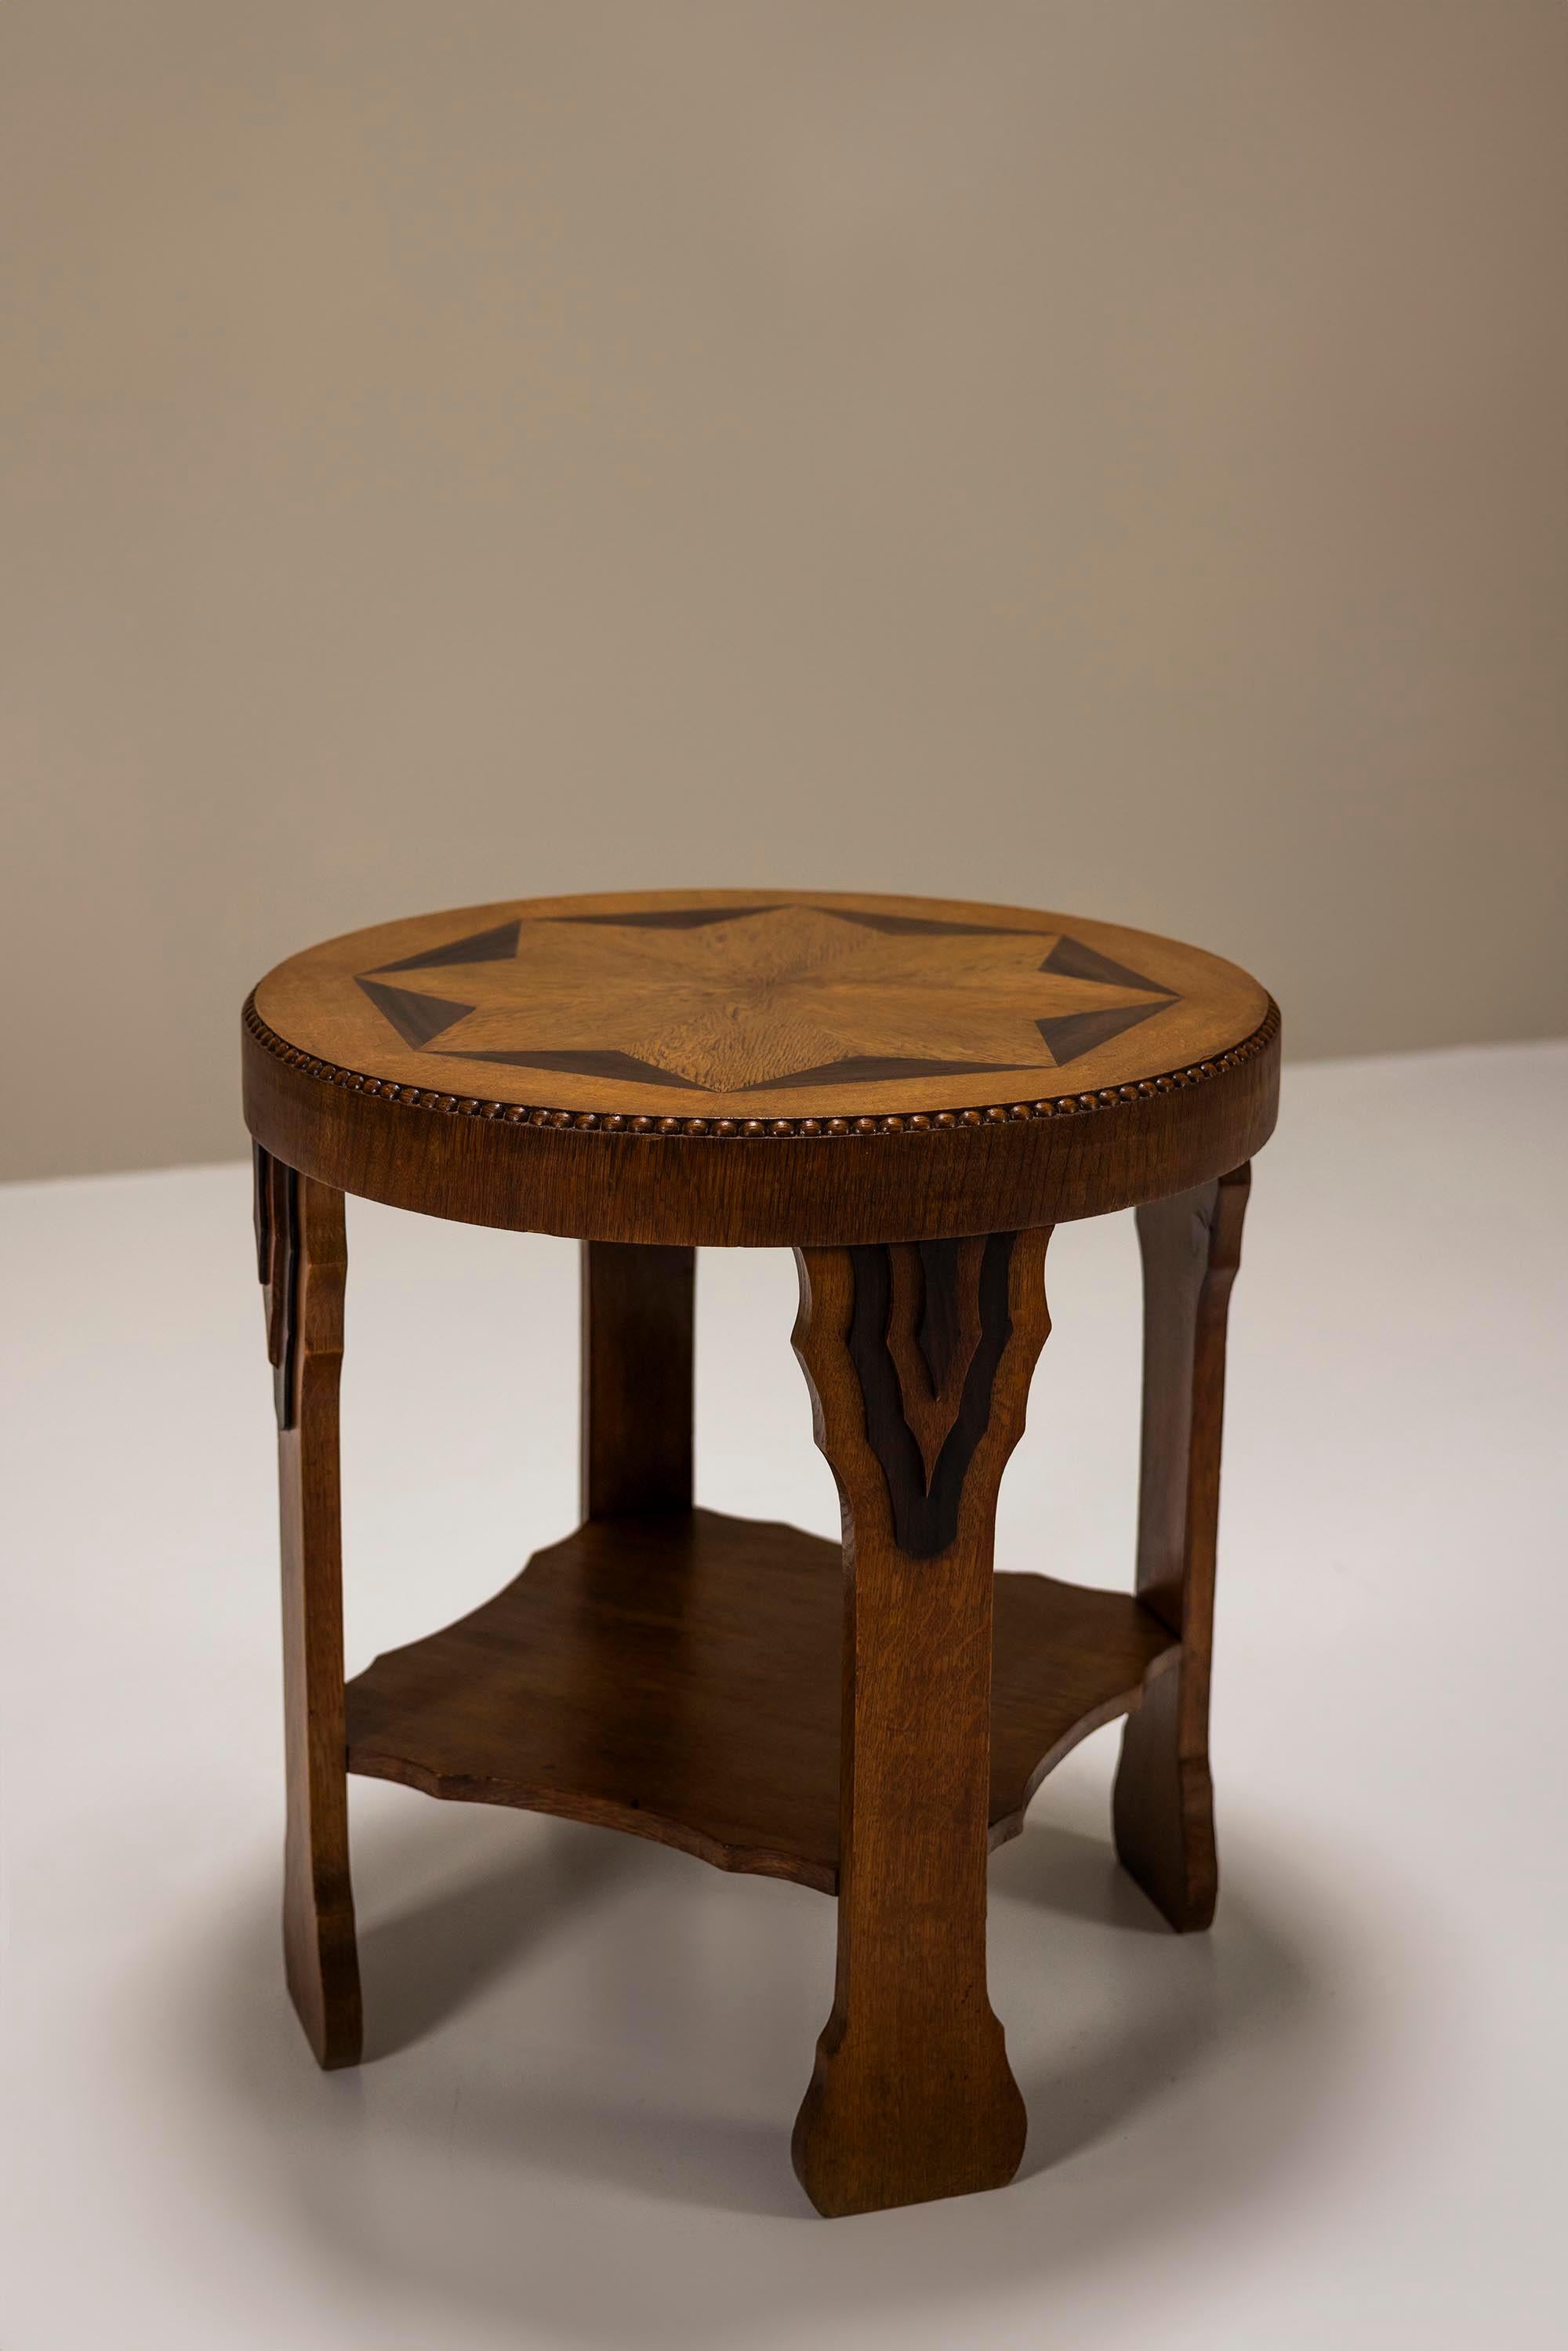 Amsterdam School Round Side Table in Oak and Ebony, 1930s In Good Condition For Sale In Hellouw, NL